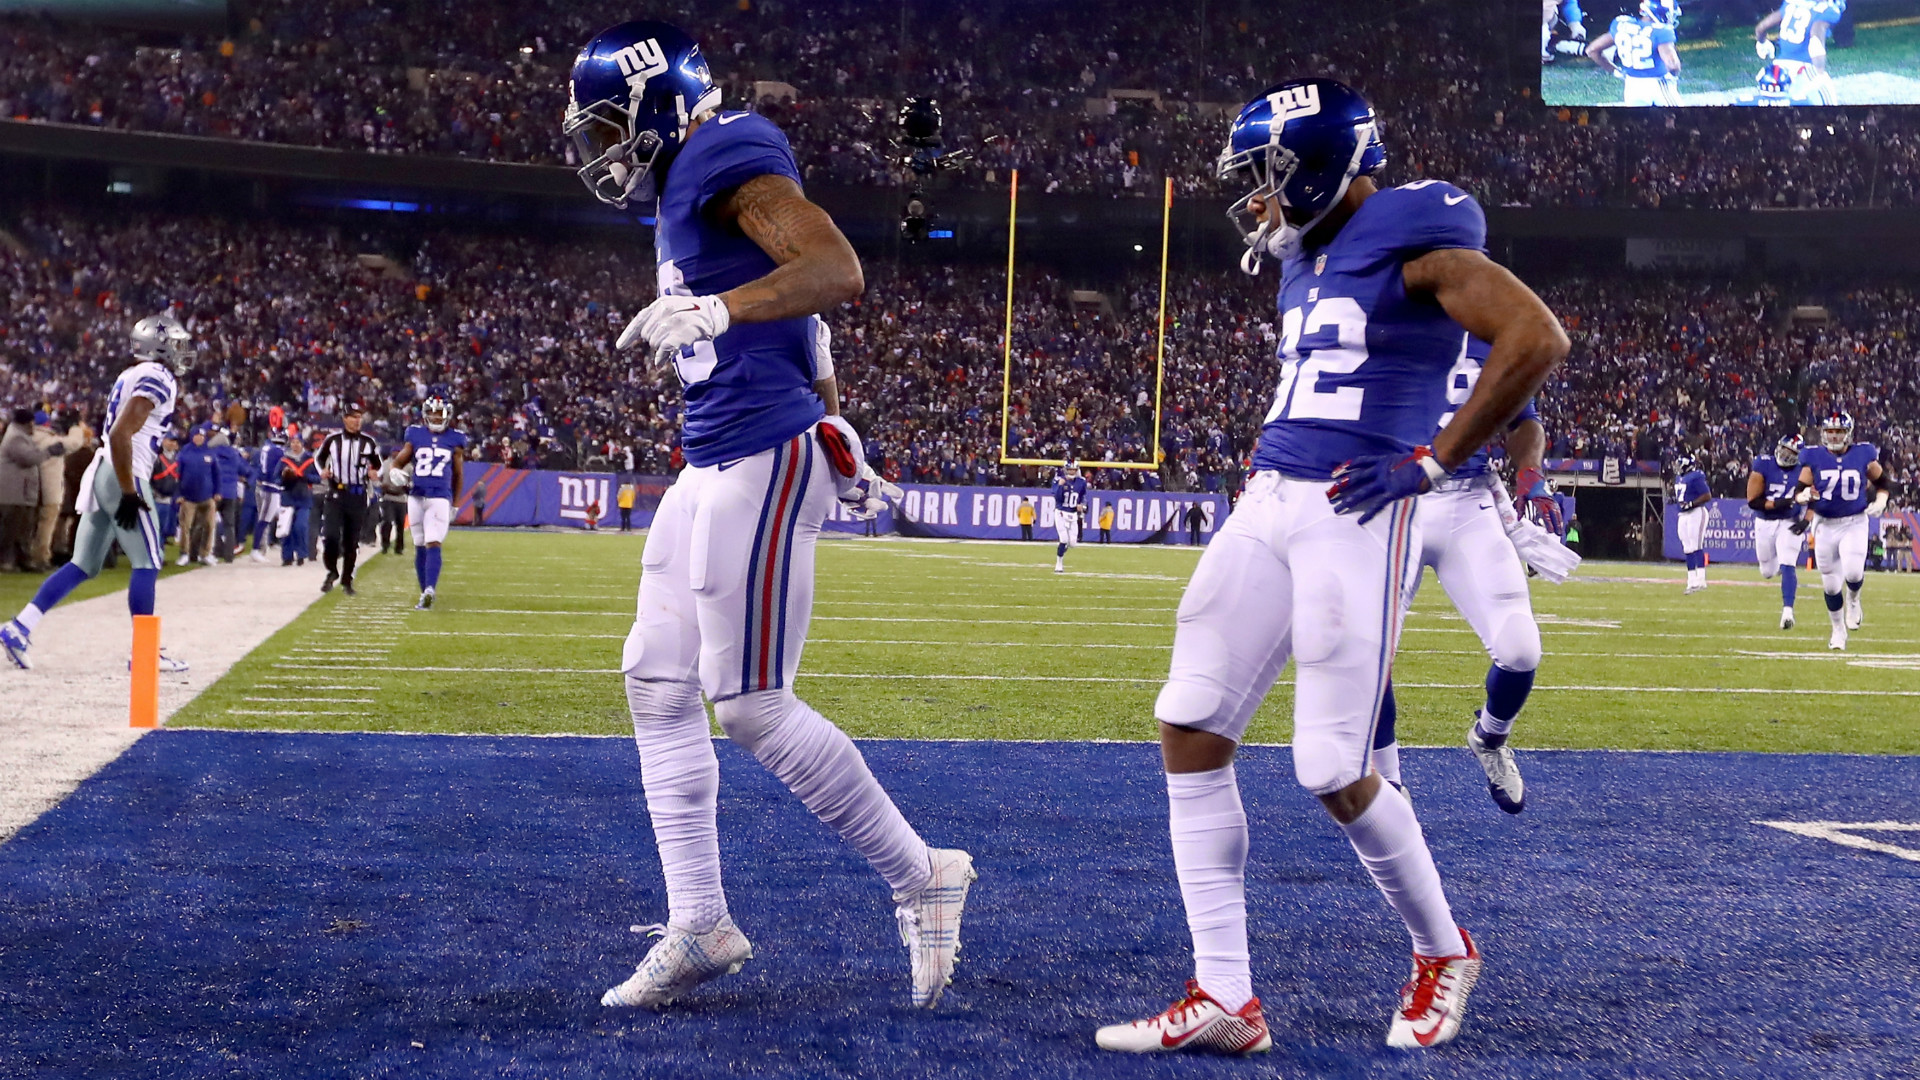 After a 61 yard touchdown, Odell Beckham Jr. channelled his inner Michael  Jackson,